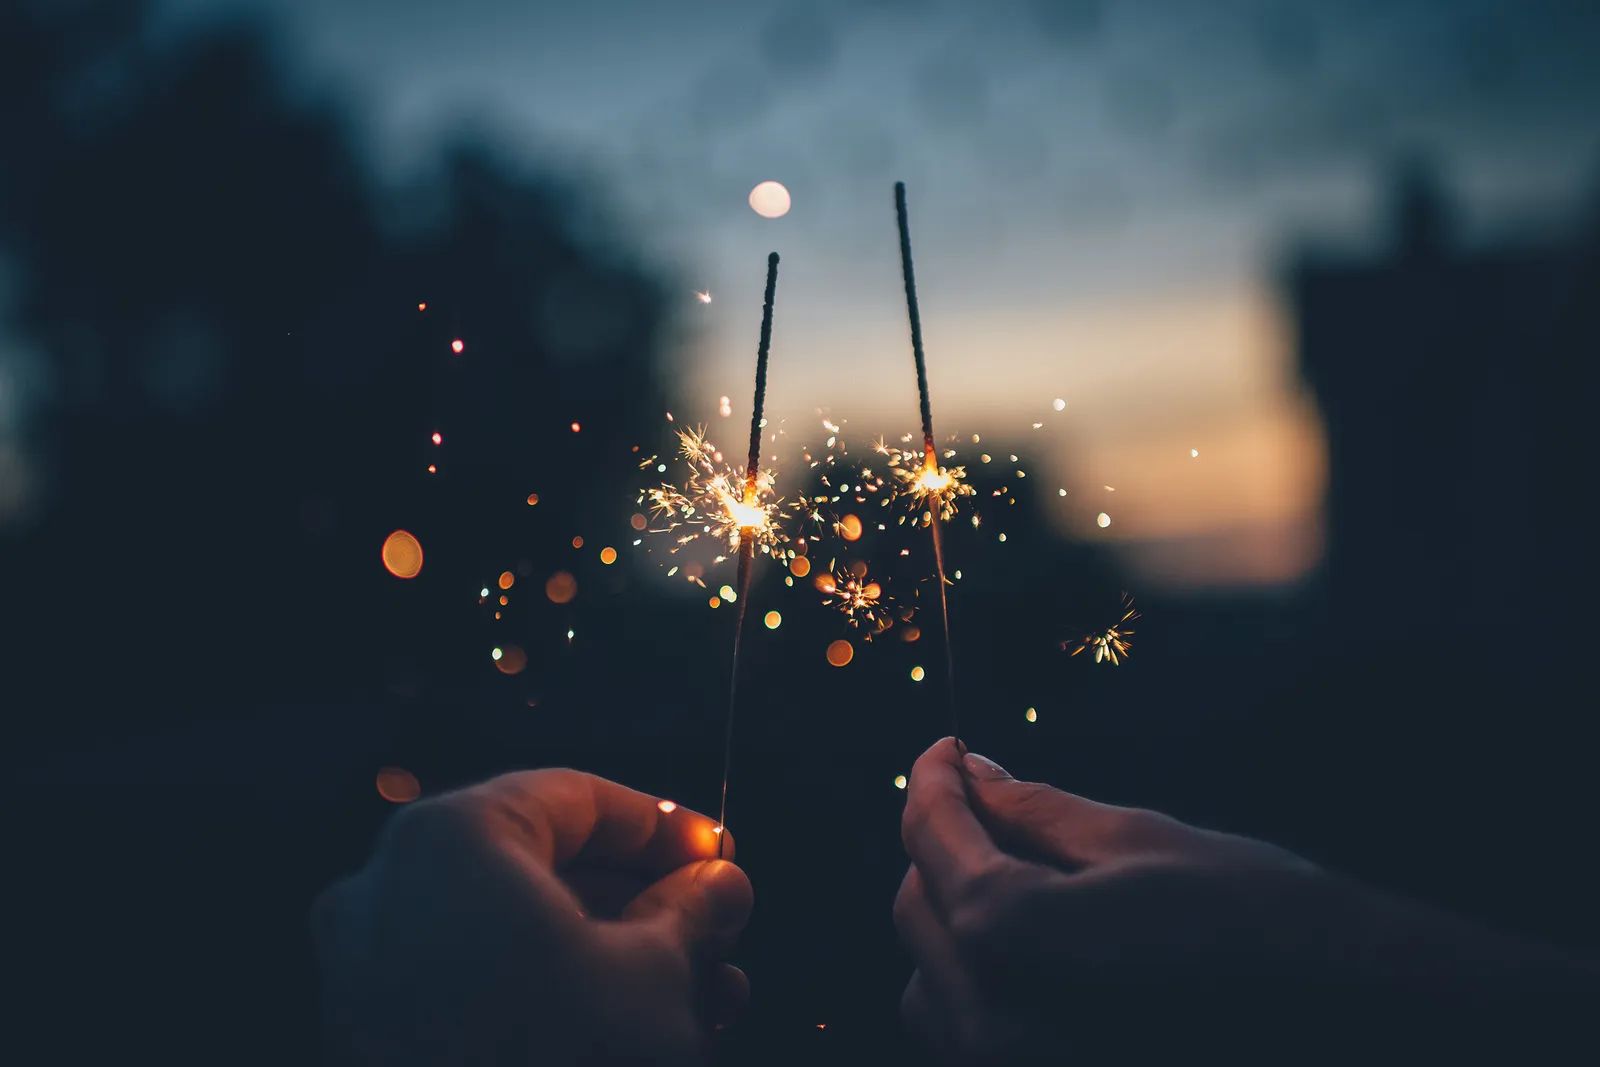 dusk image with sparklers